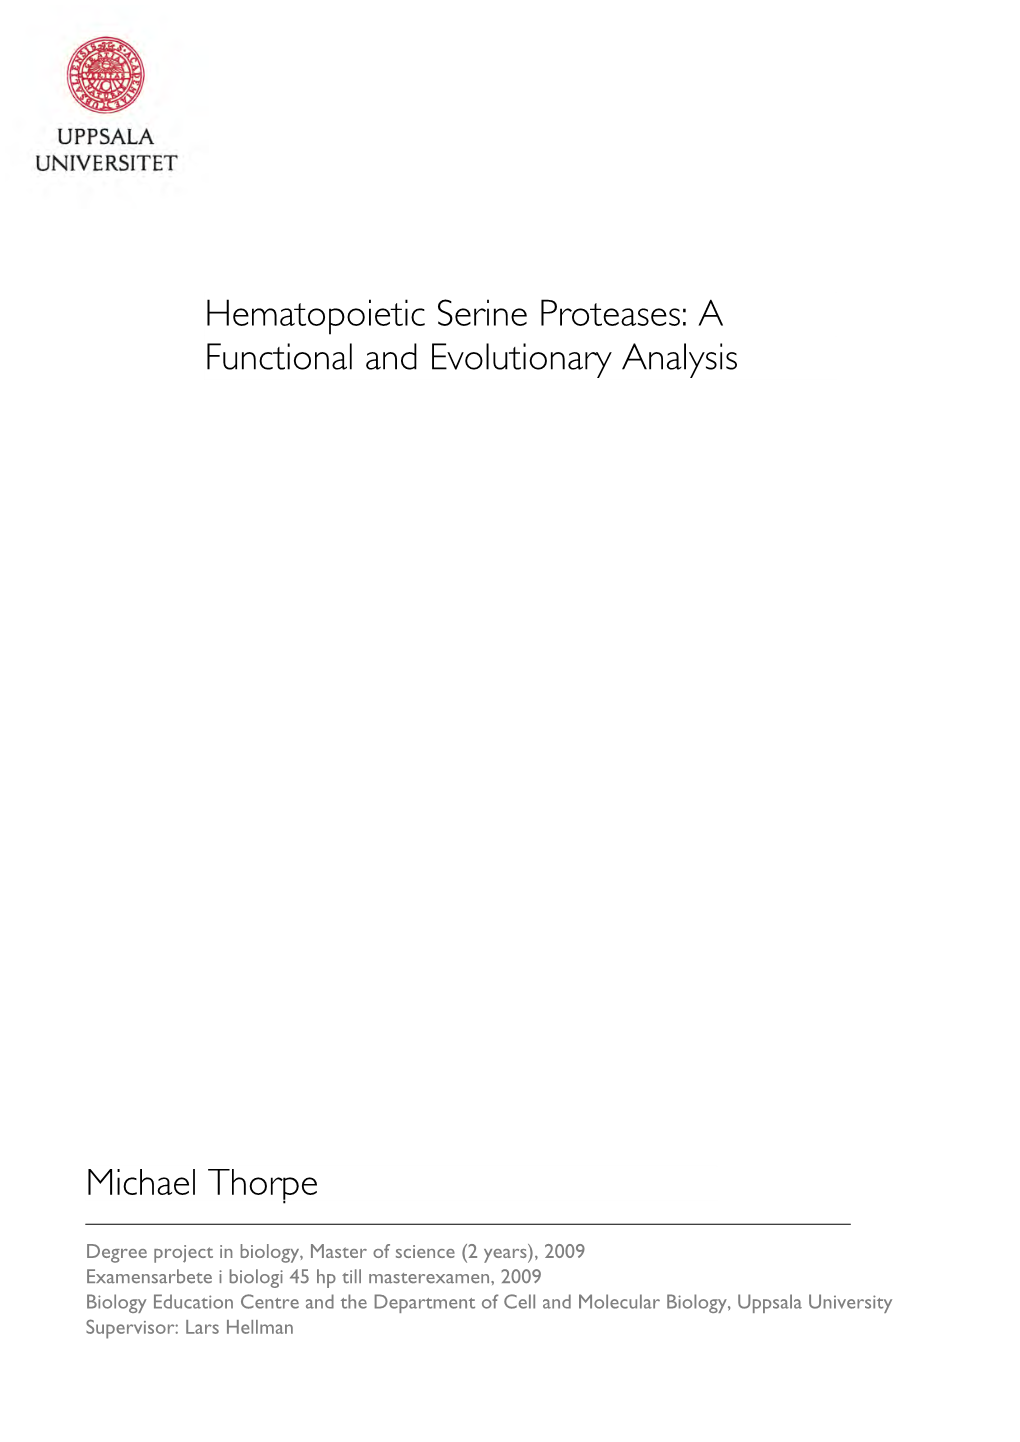 Hematopoietic Serine Proteases: a Functional and Evolutionary Analysis